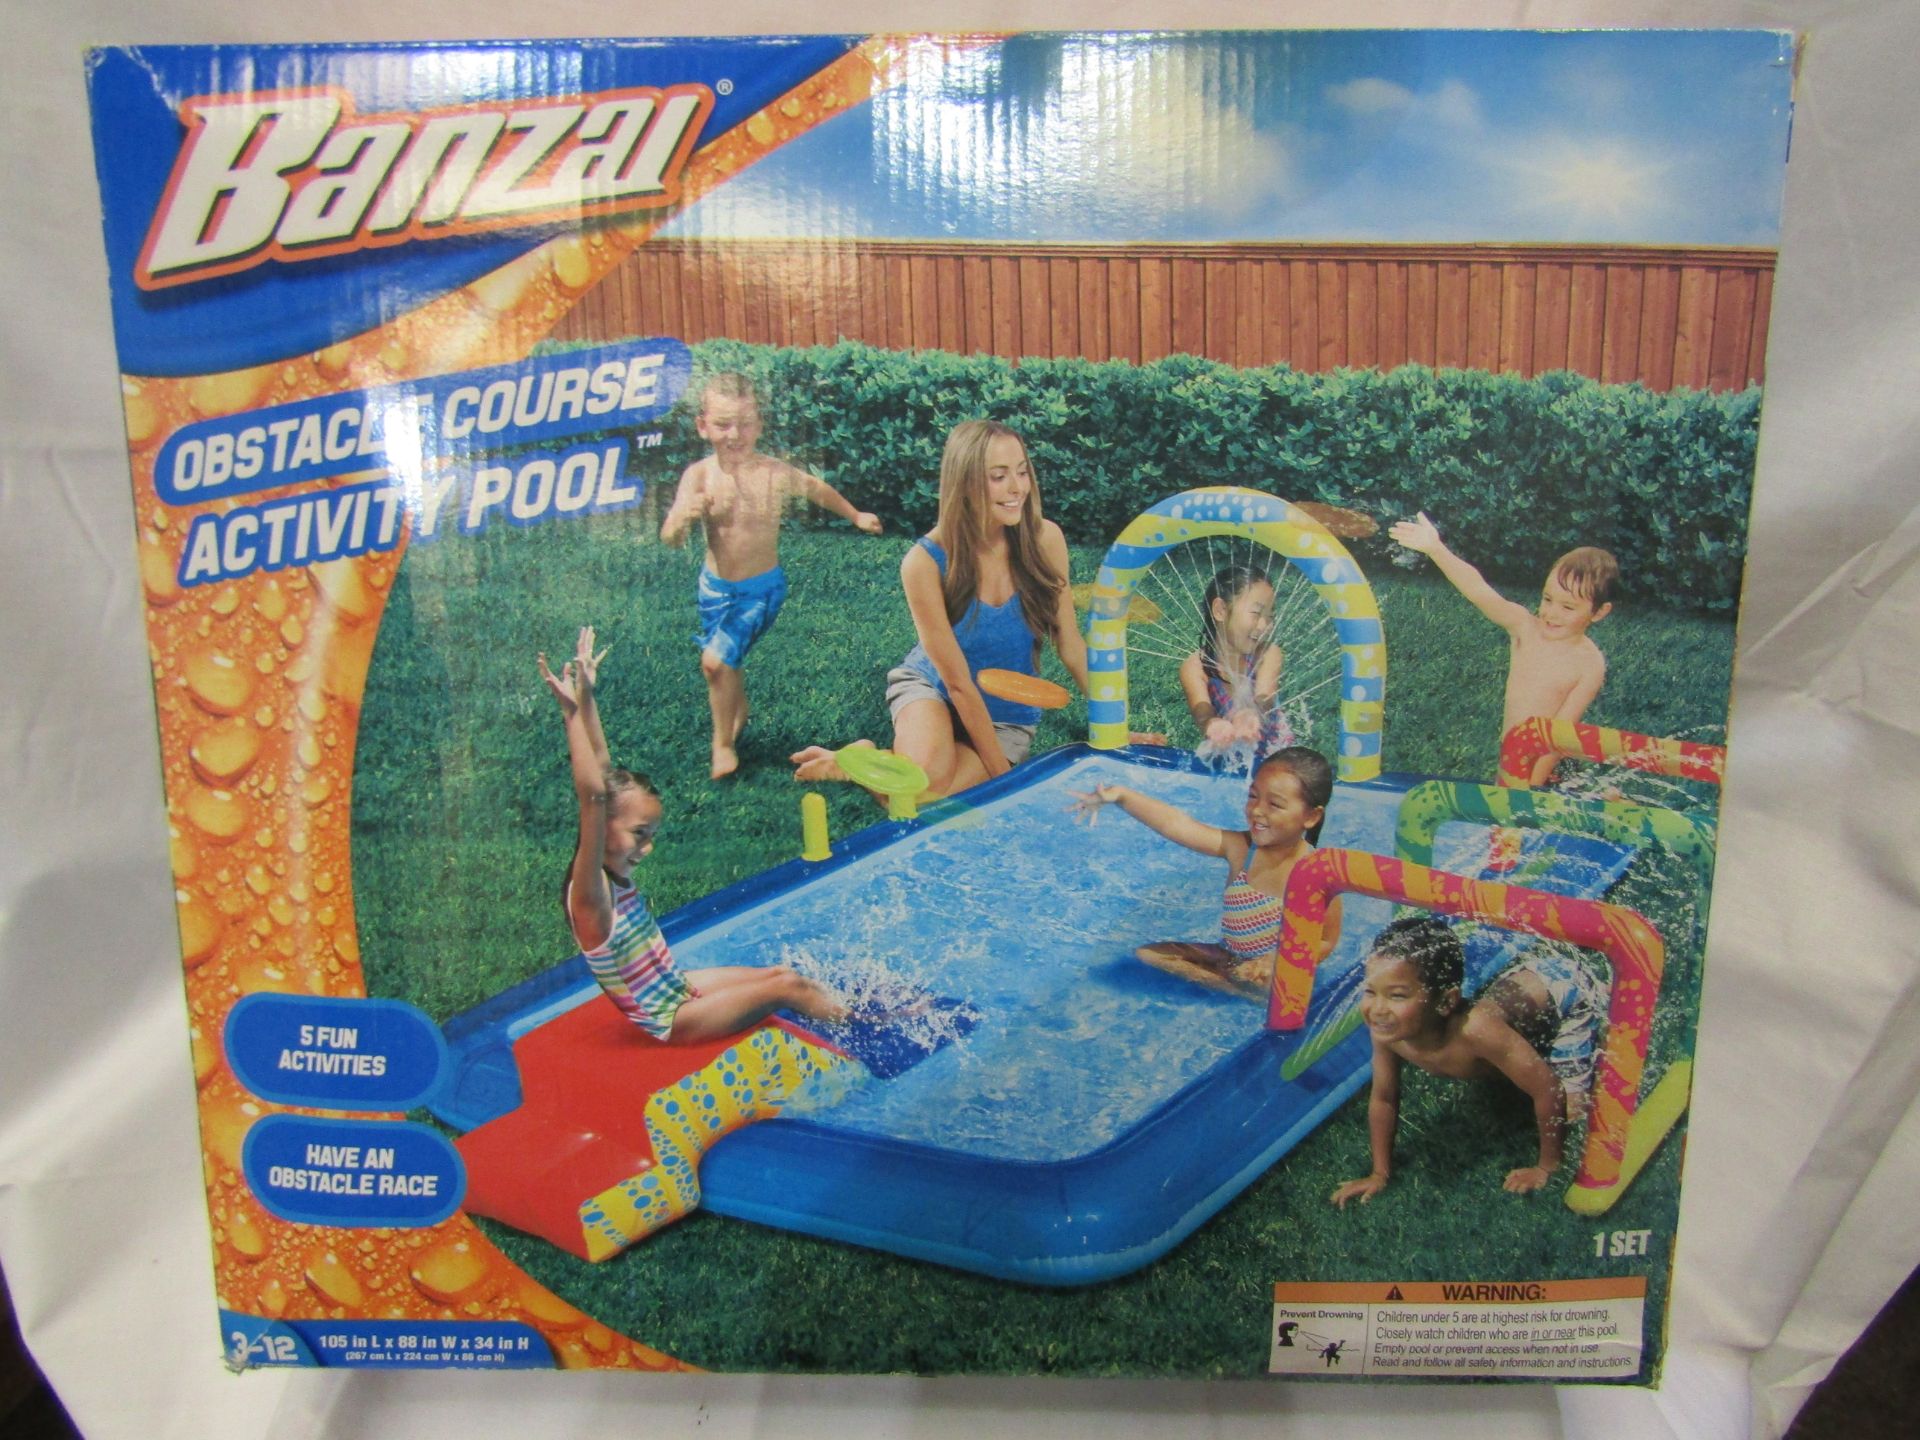 Banzai Obstacle Course Activity Pool 267 X 224 X 86 CM Unchecked & Boxed